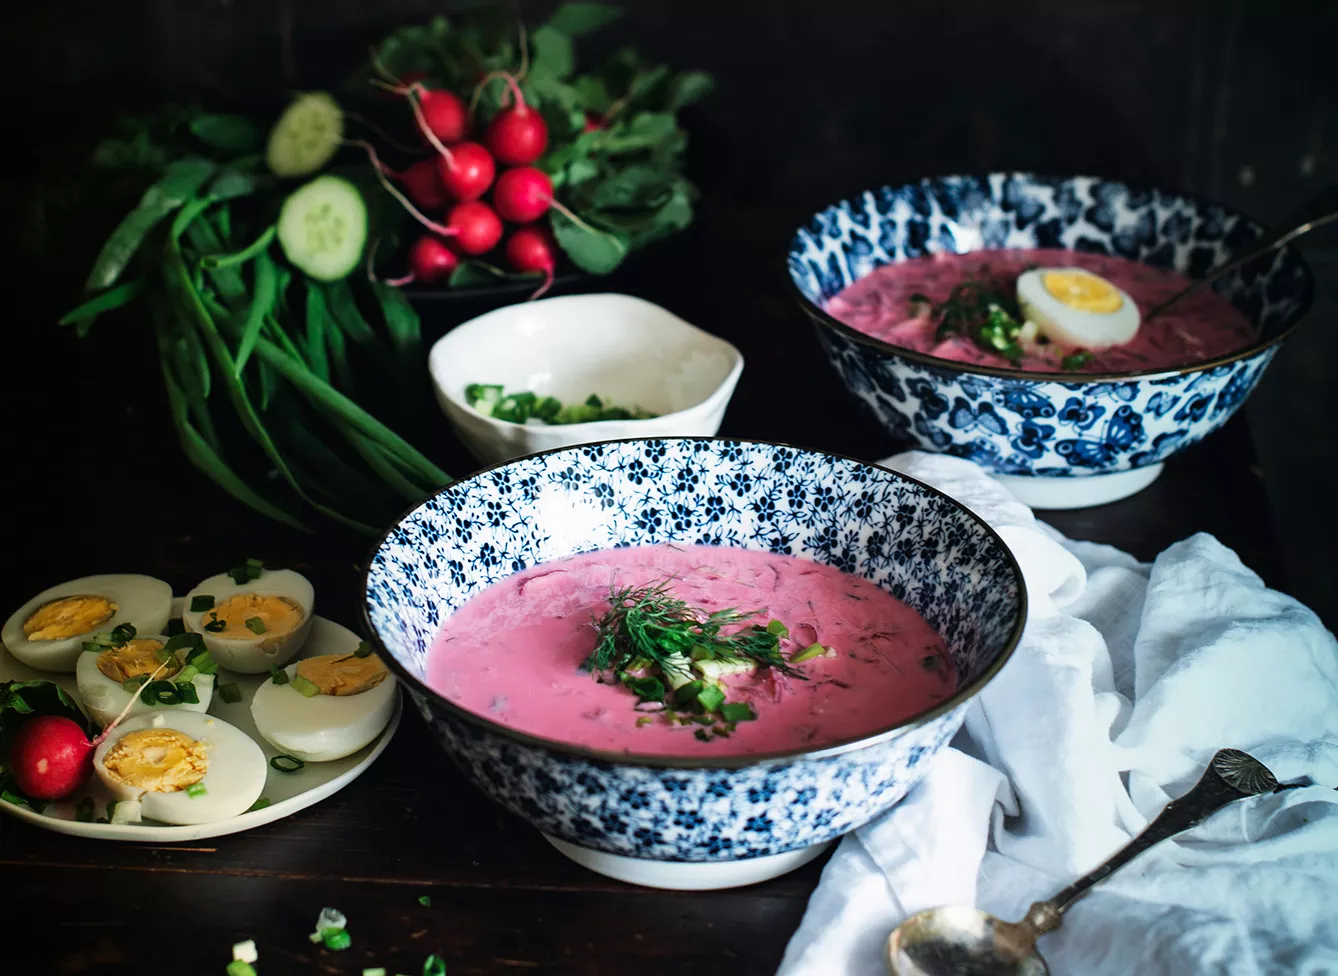 Cold Beetroot Soup